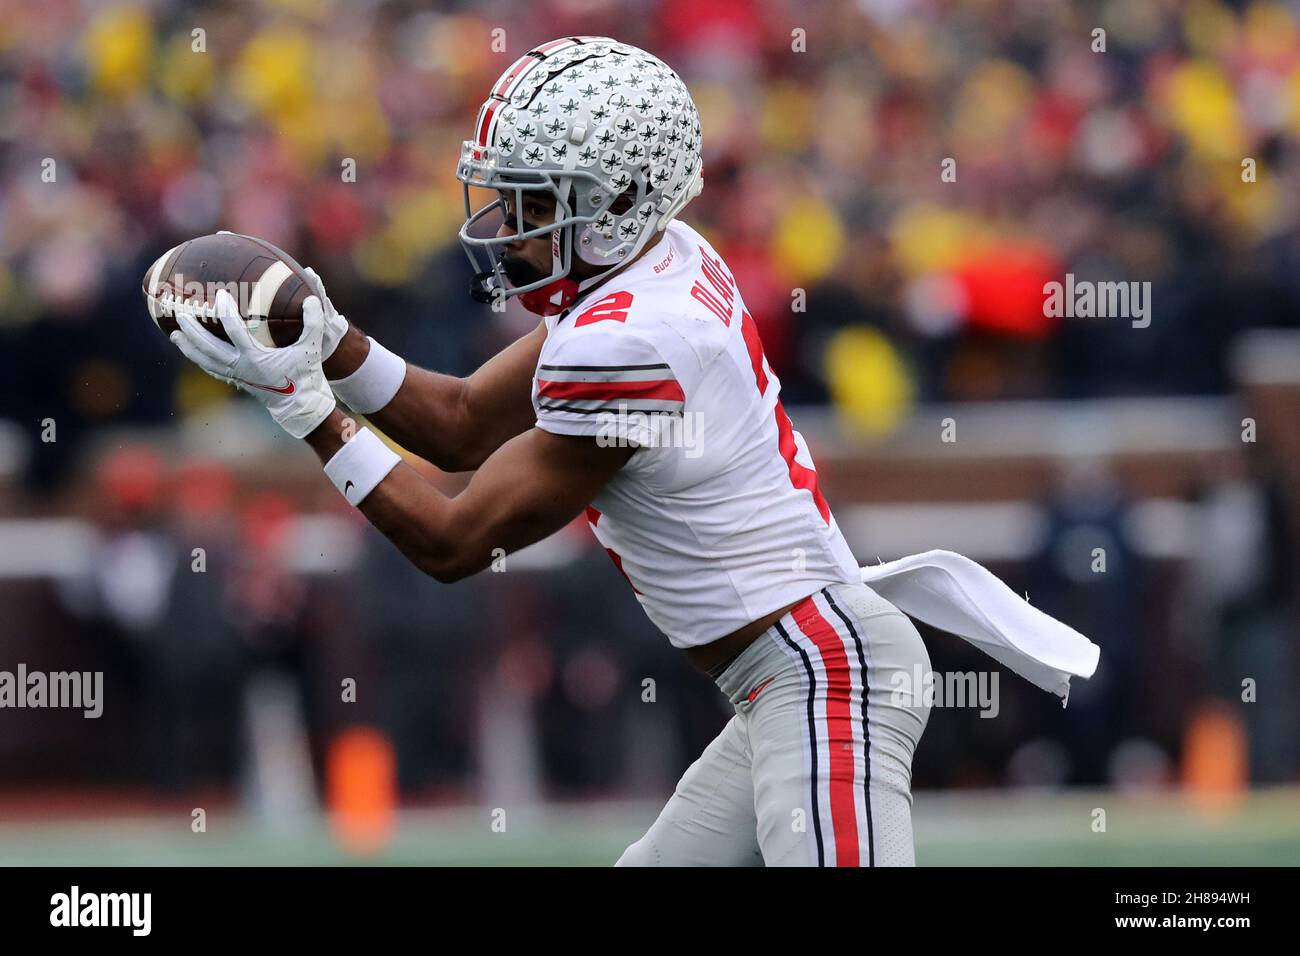 Ann Arbor, United States. 28th Nov, 2021. Ohio State Buckeyes Chris Olave (2) makes a catch against the Michigan Wolverines in Ann Arbor, Michigan on Saturday, November 27, 2021. Photo by Aaron Josefczyk/UPI Credit: UPI/Alamy Live News Stock Photo